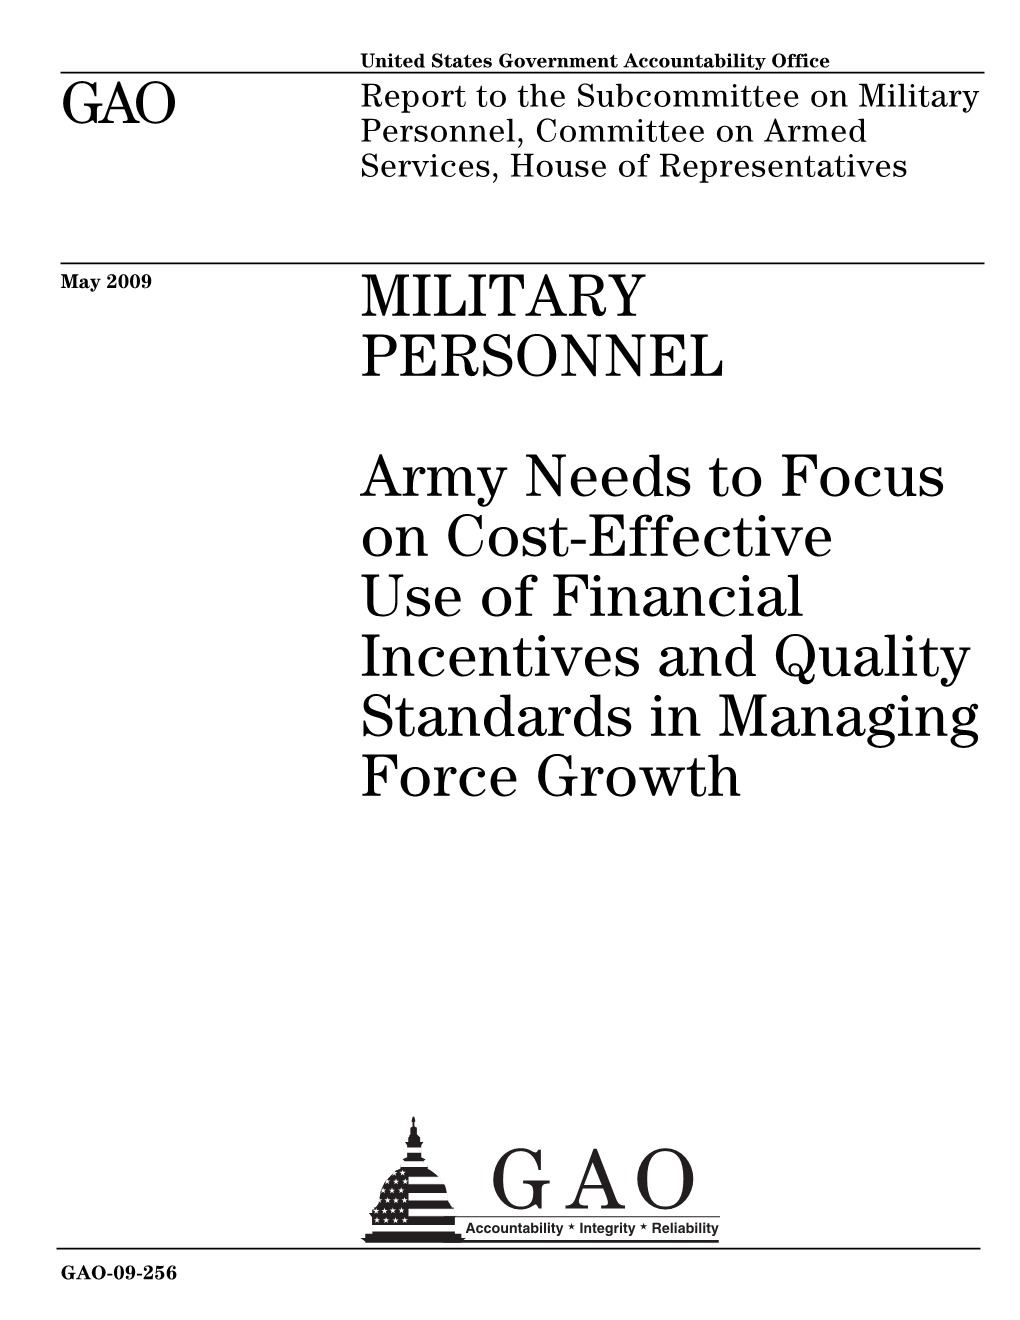 GAO-09-256 Military Personnel: Army Needs to Focus on Cost-Effective